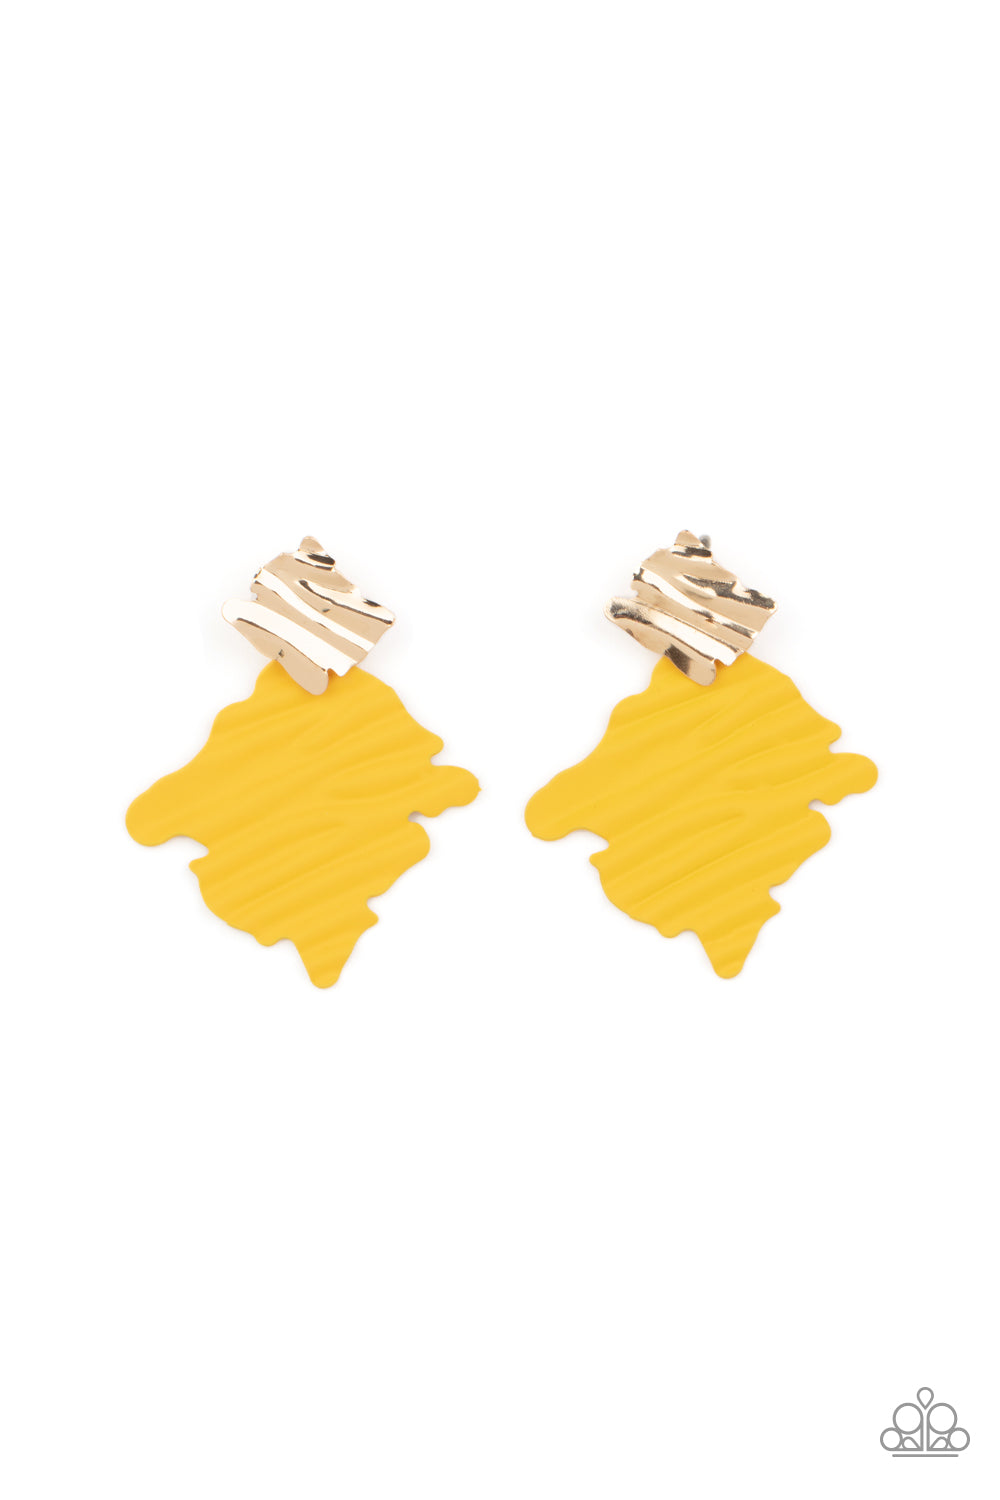 Paparazzi Crimped Couture Yellow Post Earrings